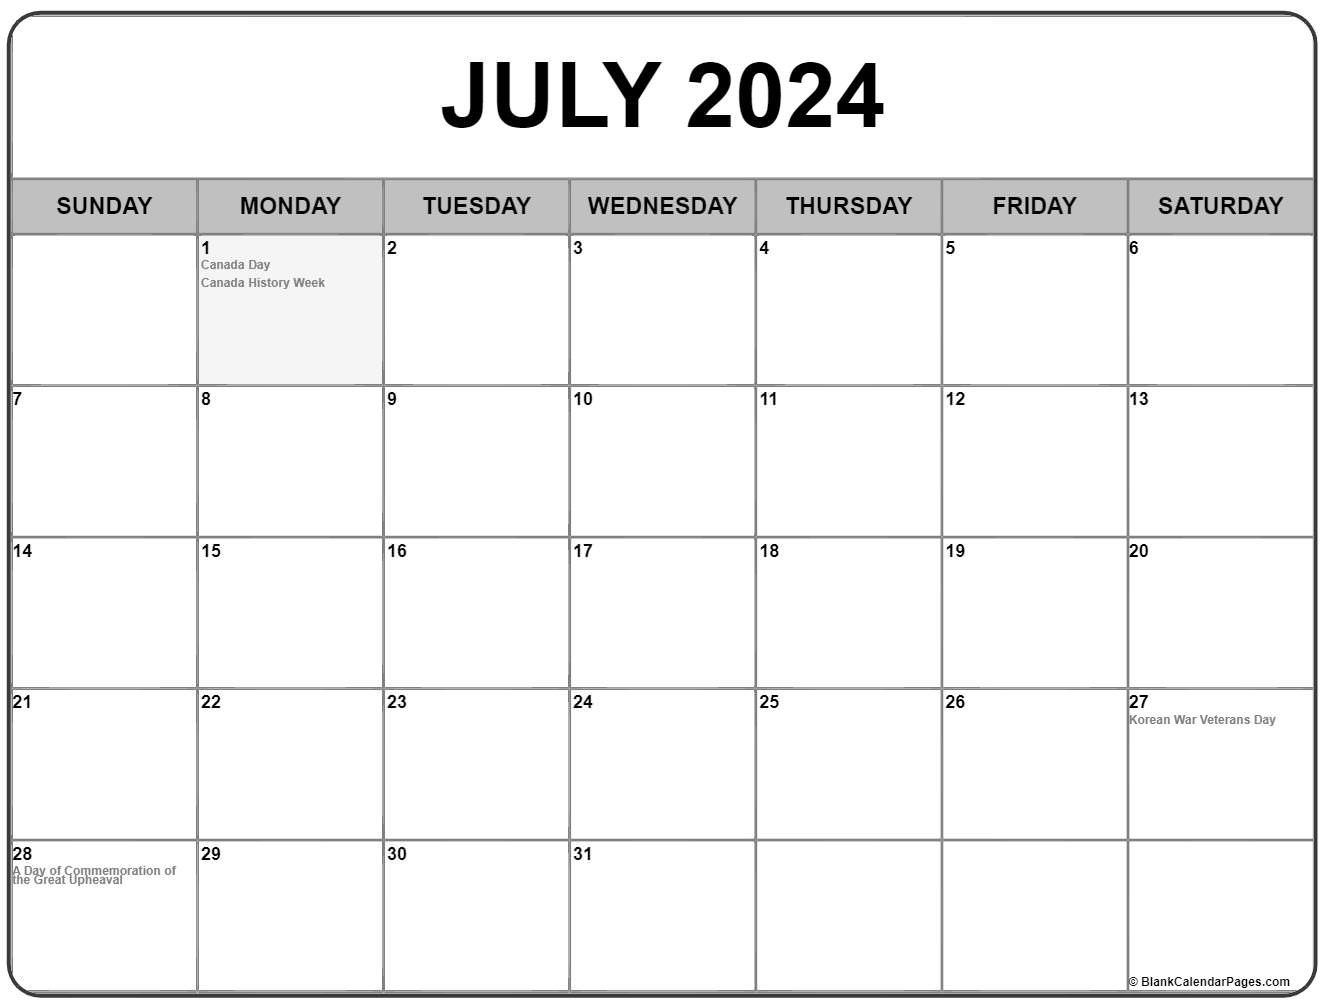 collection-of-july-2020-calendars-with-holidays